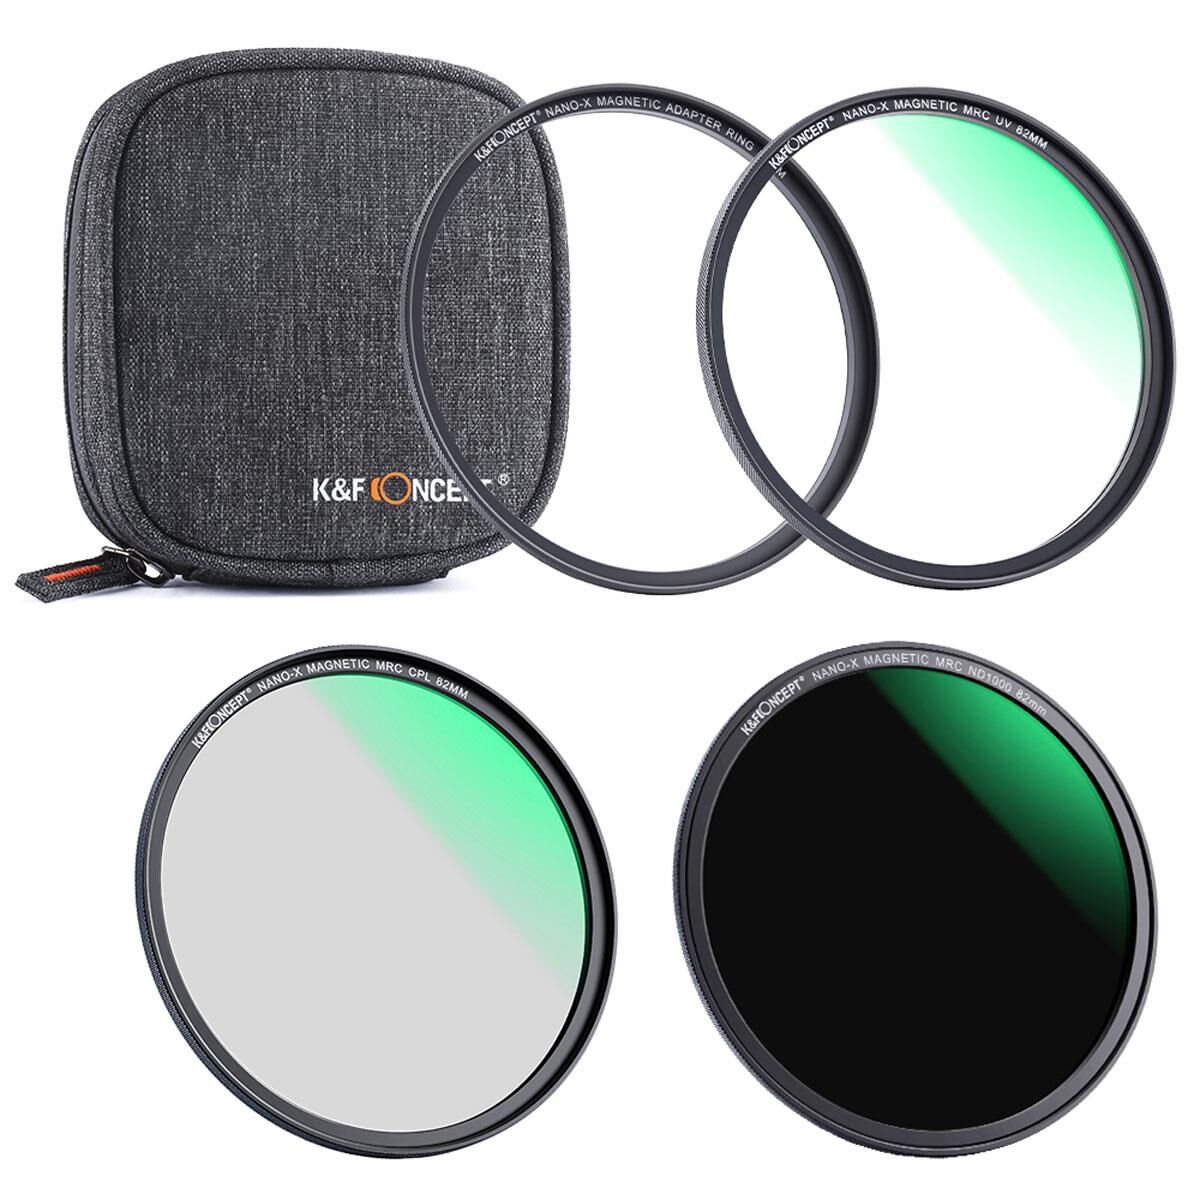 K&F Concept K&amp;F Concept 72mm 3-Piece Magnetic Lens Filter Kit w/MCUV, CPL, ND1000 HD Filters